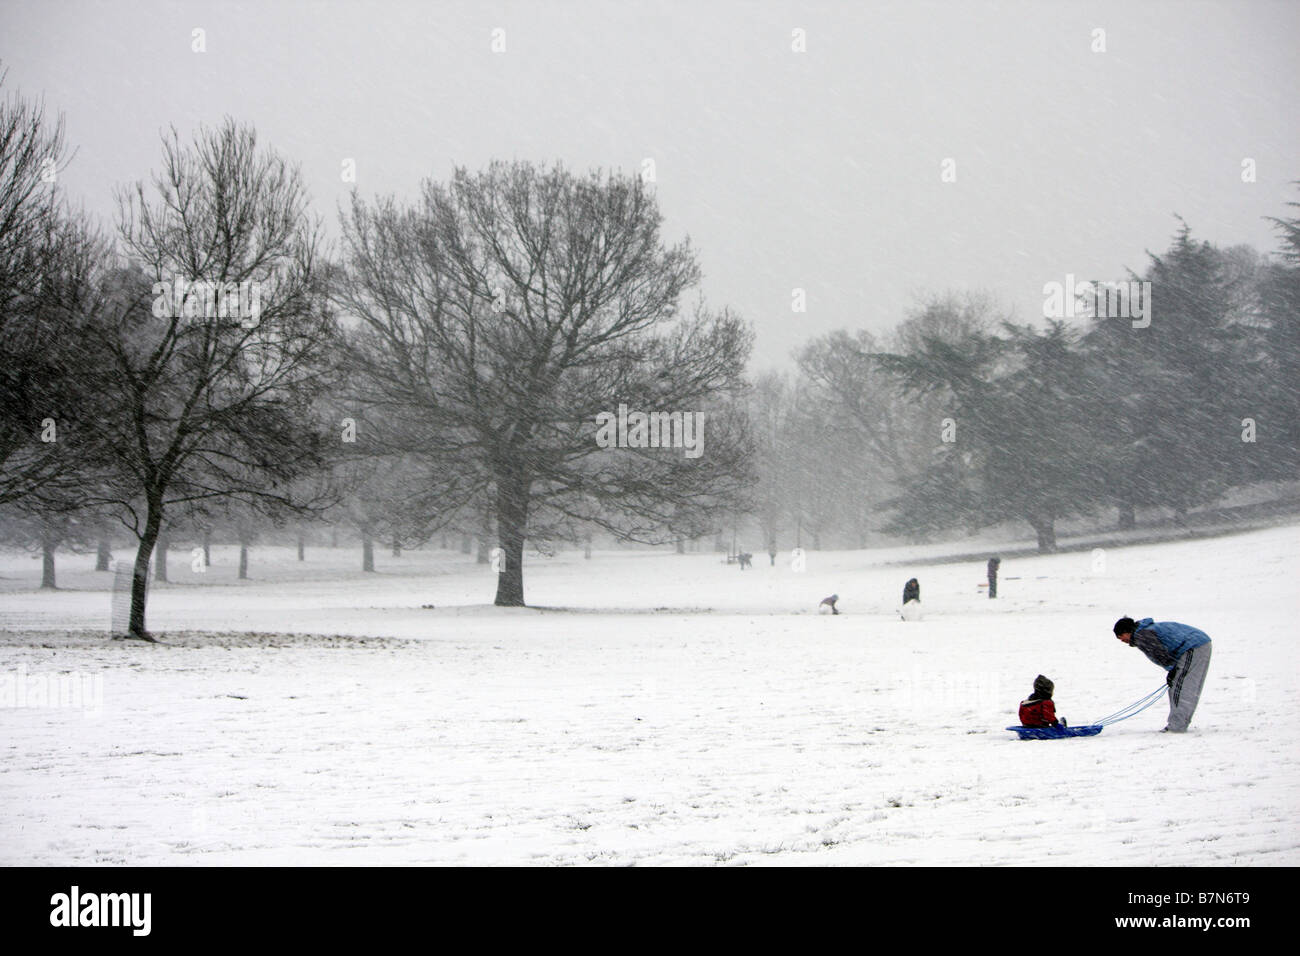 Sledging fun at the park Stock Photo